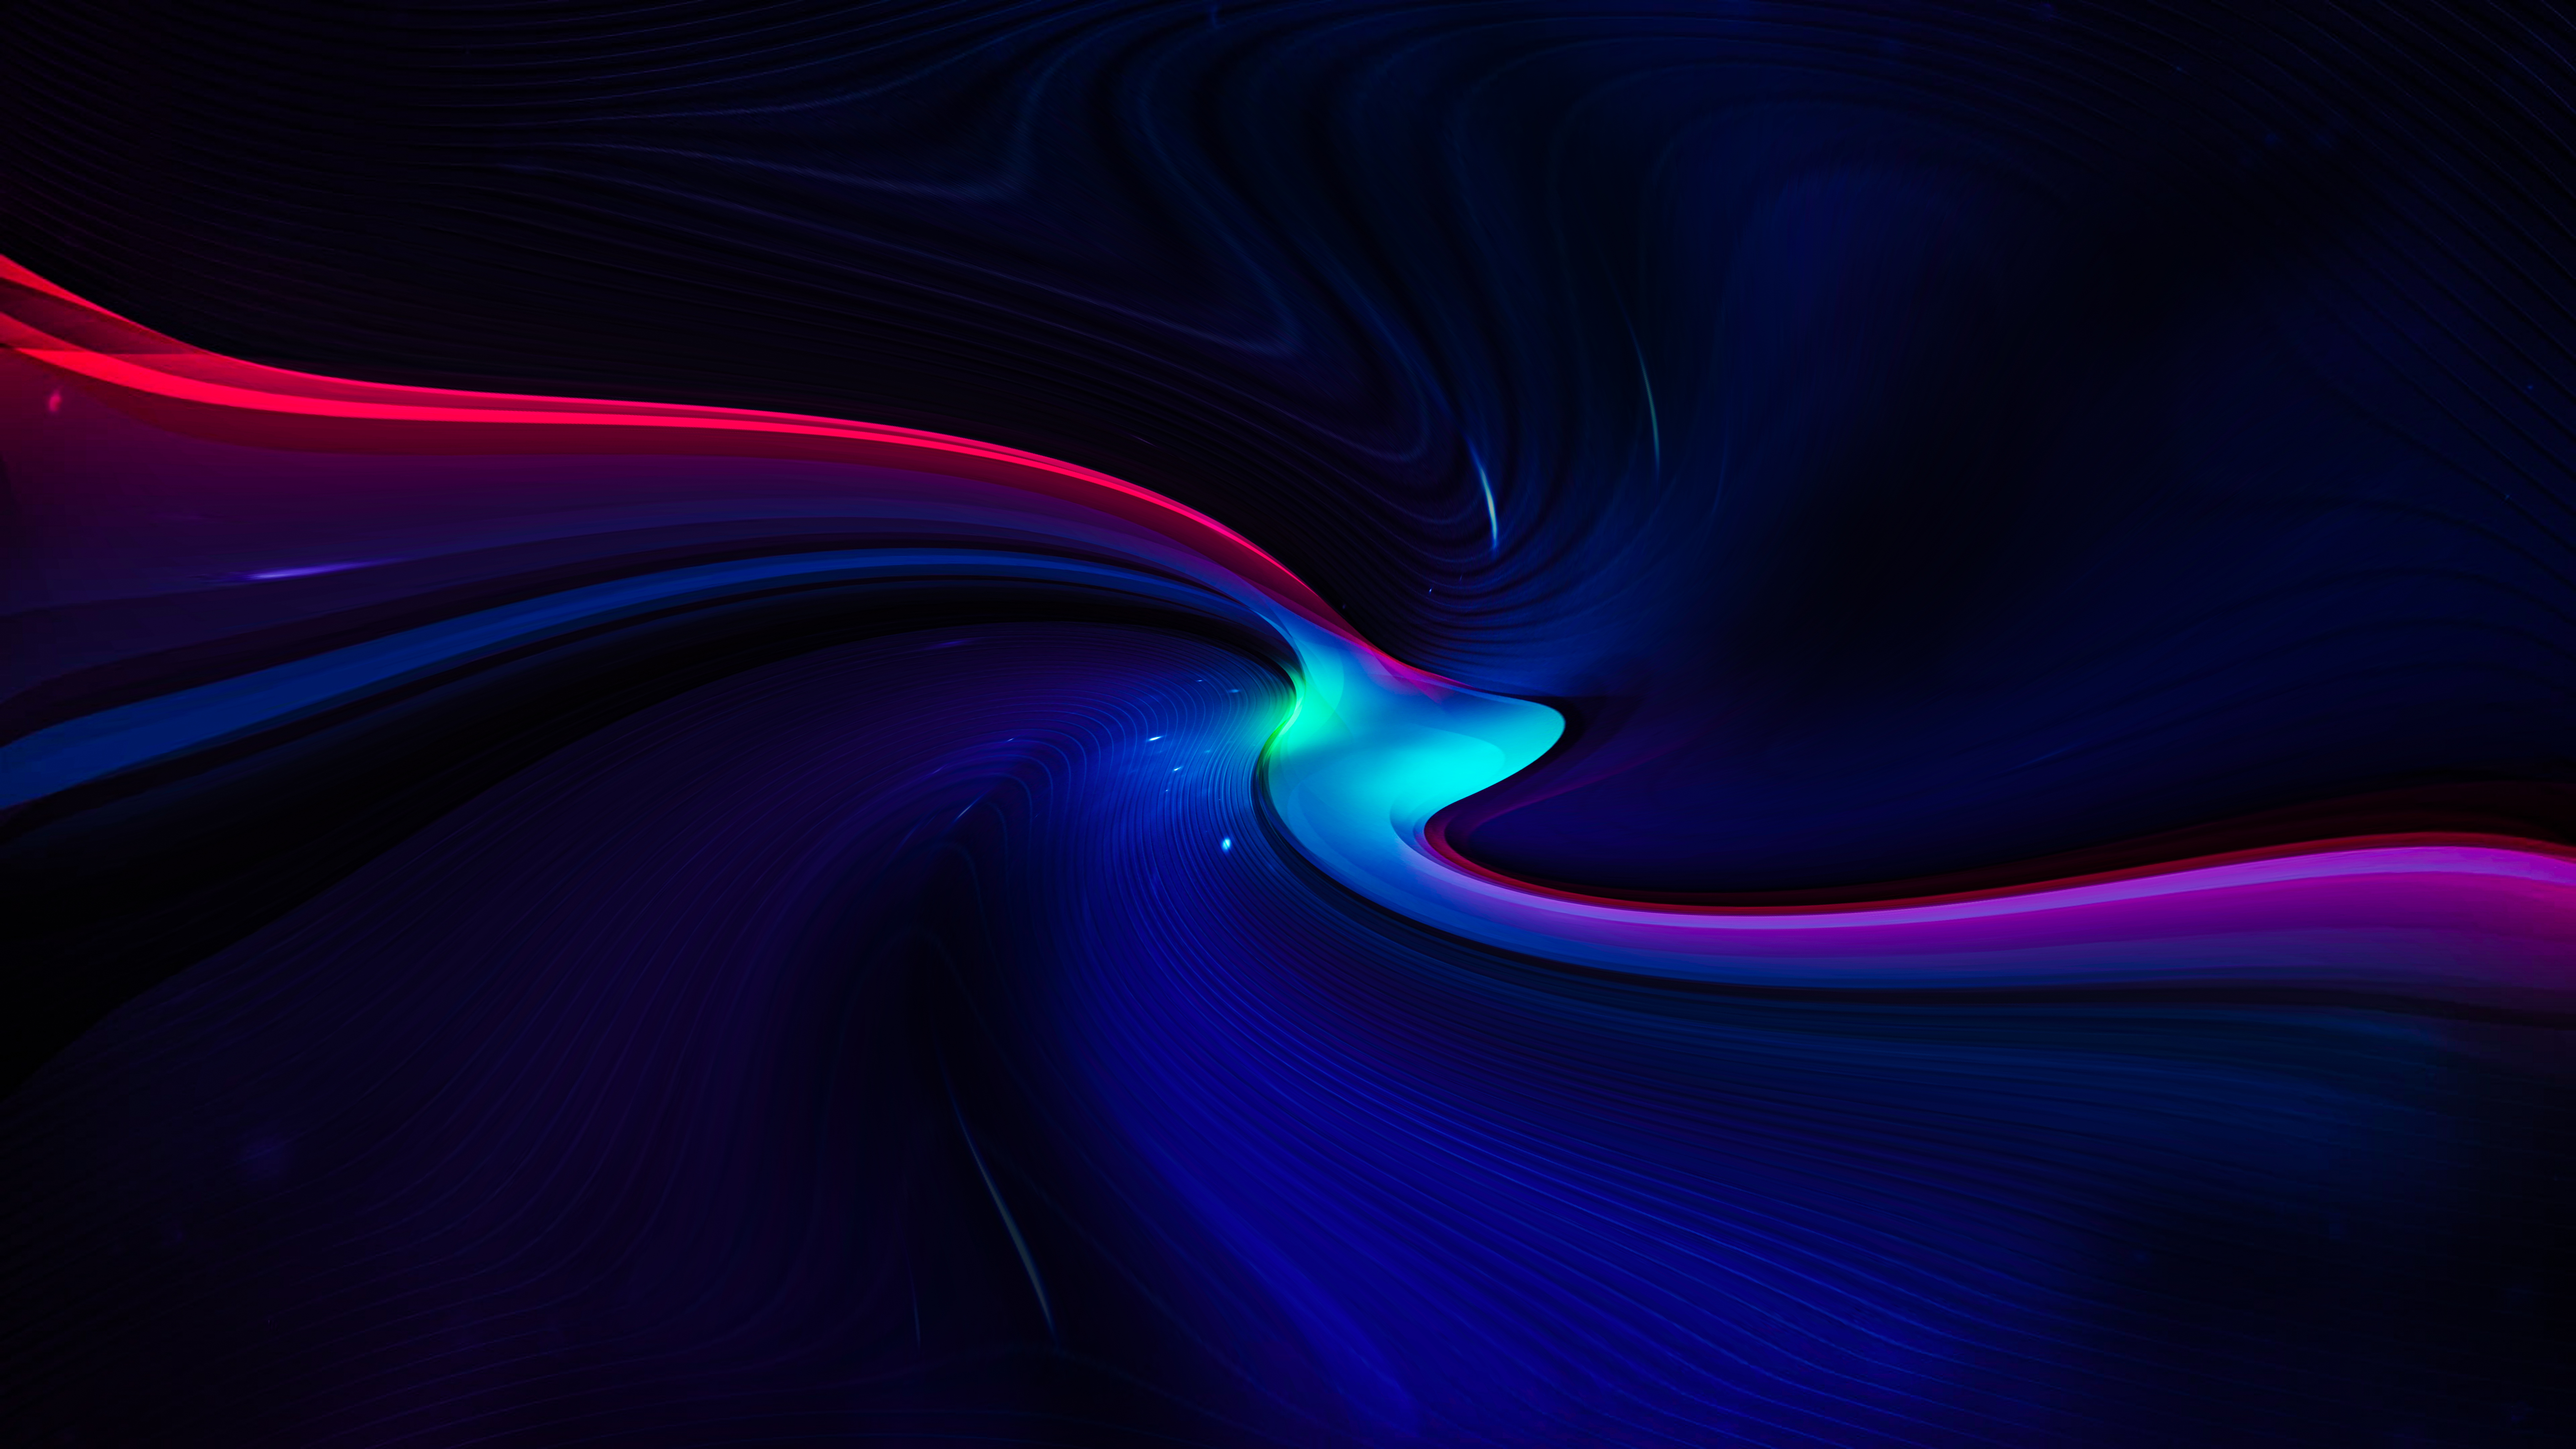 Abstract Colors 8K Gradient Art Wallpapers